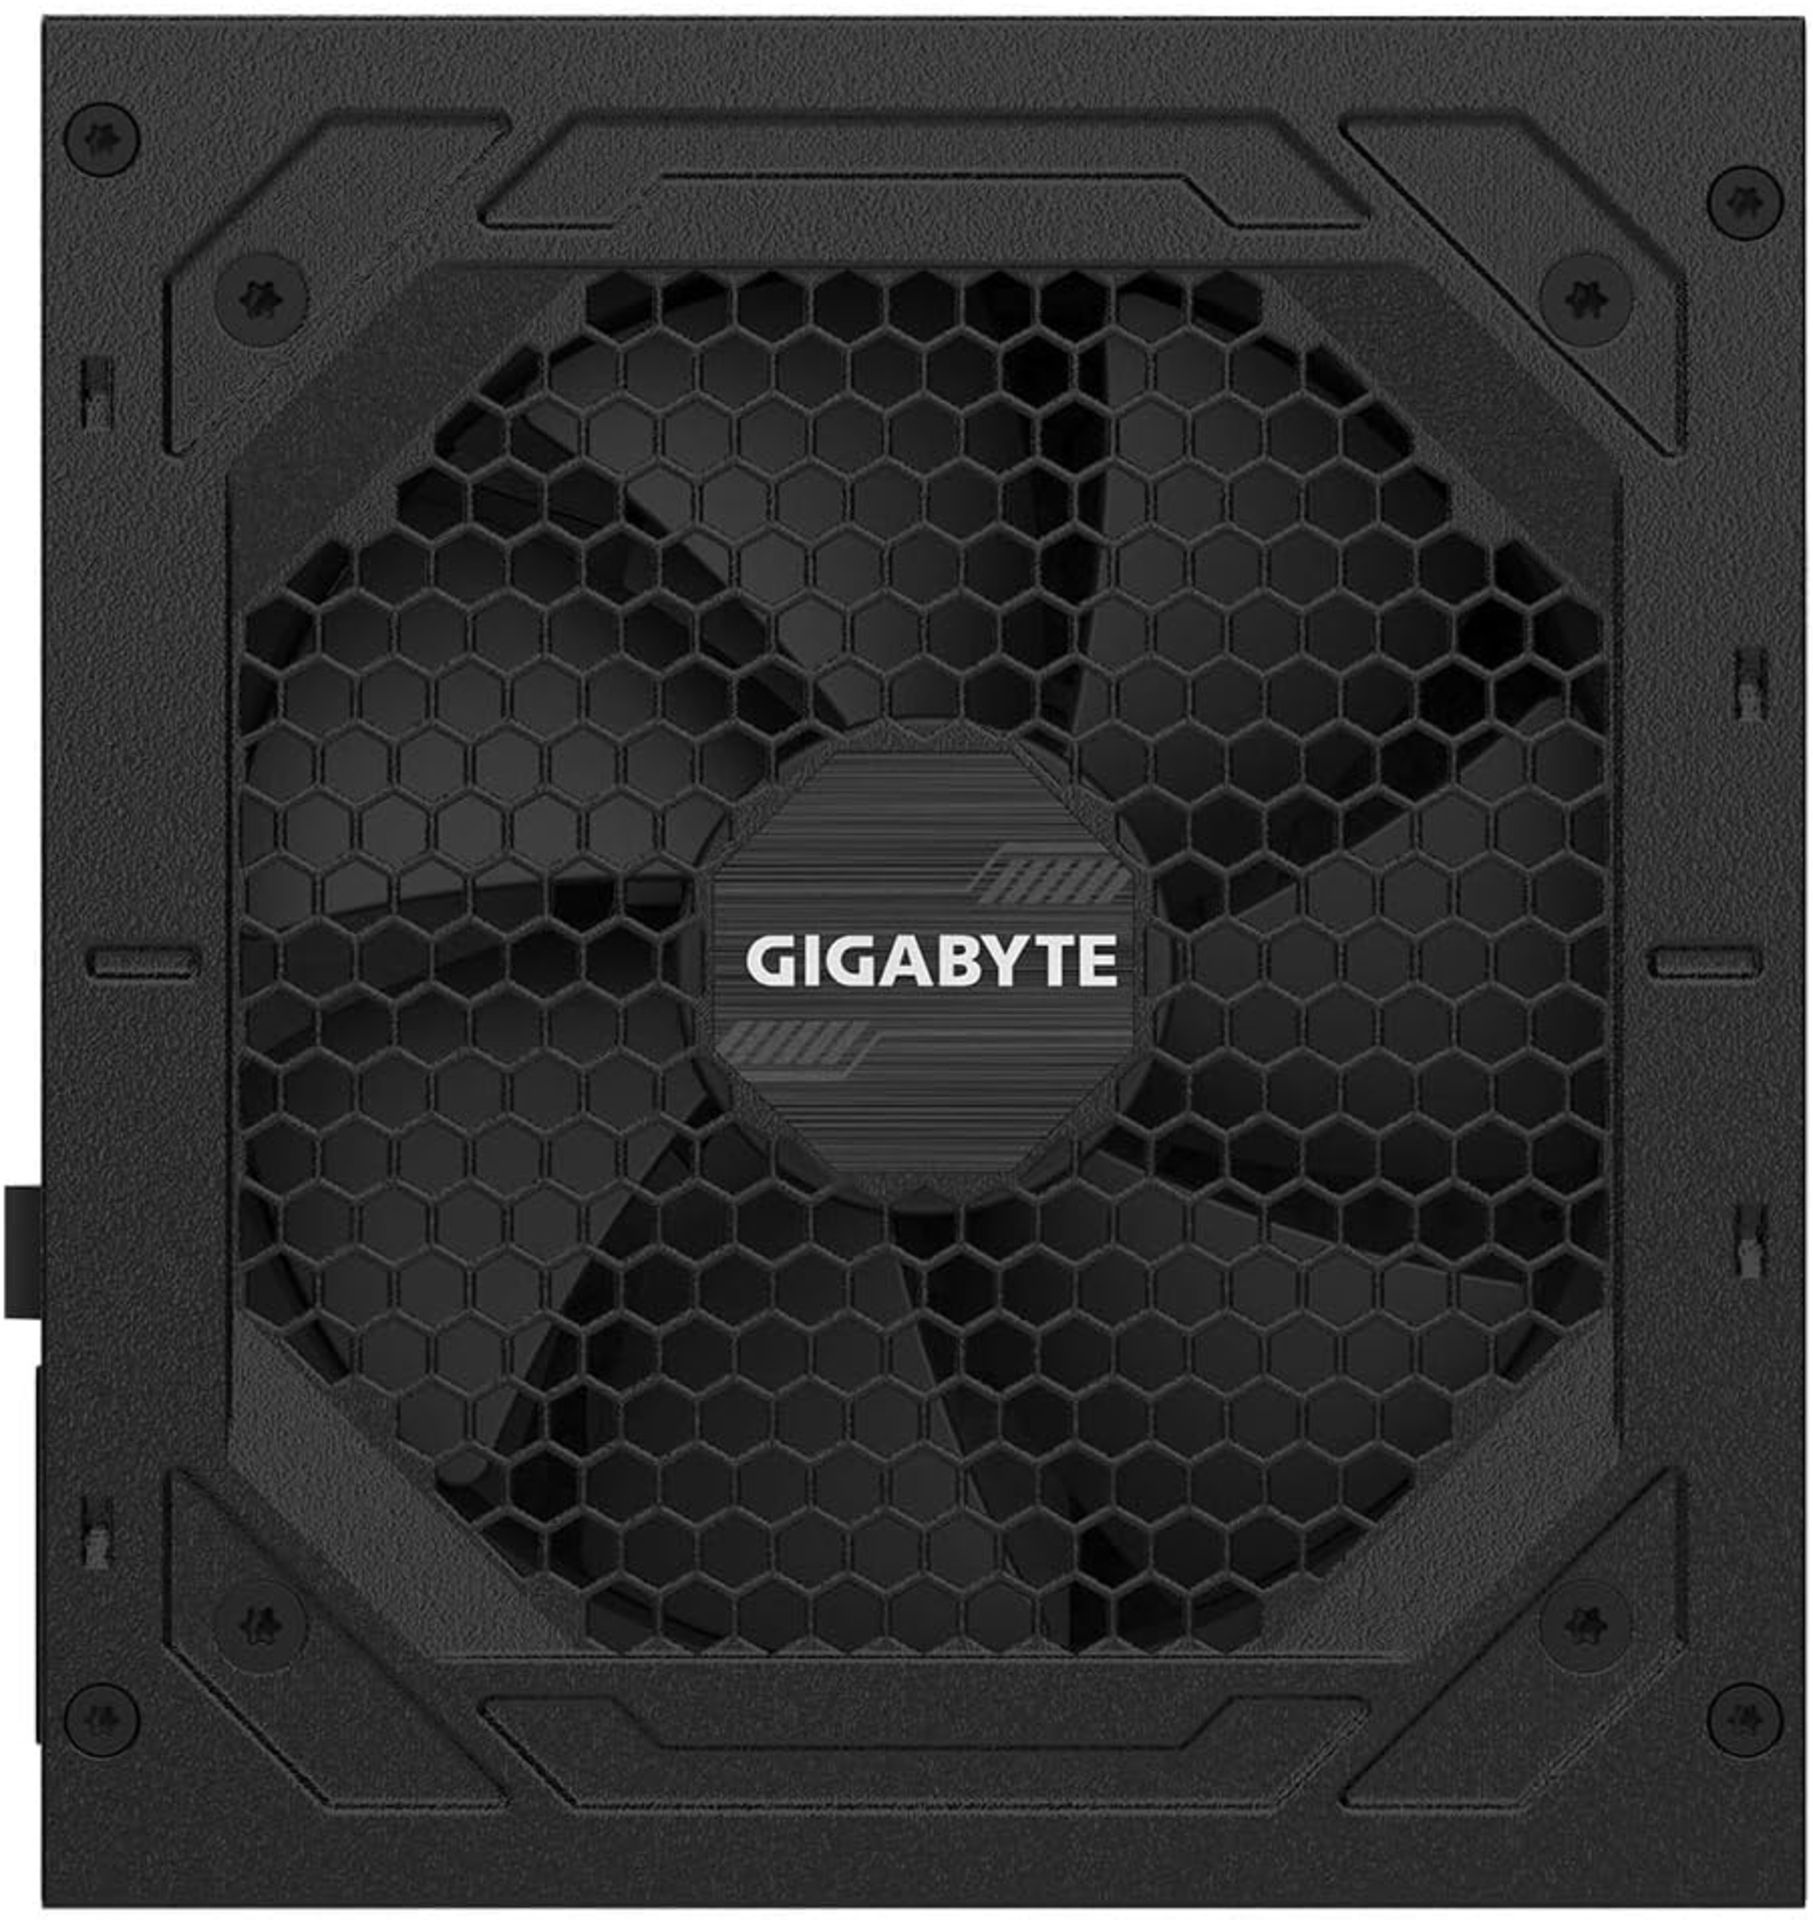 BRAND NEW FACTORY SEALED GIGABYTE P750GM 750w 80 Plus Gold Fully Modular Power Supply. RRP £84.99. - Image 5 of 6